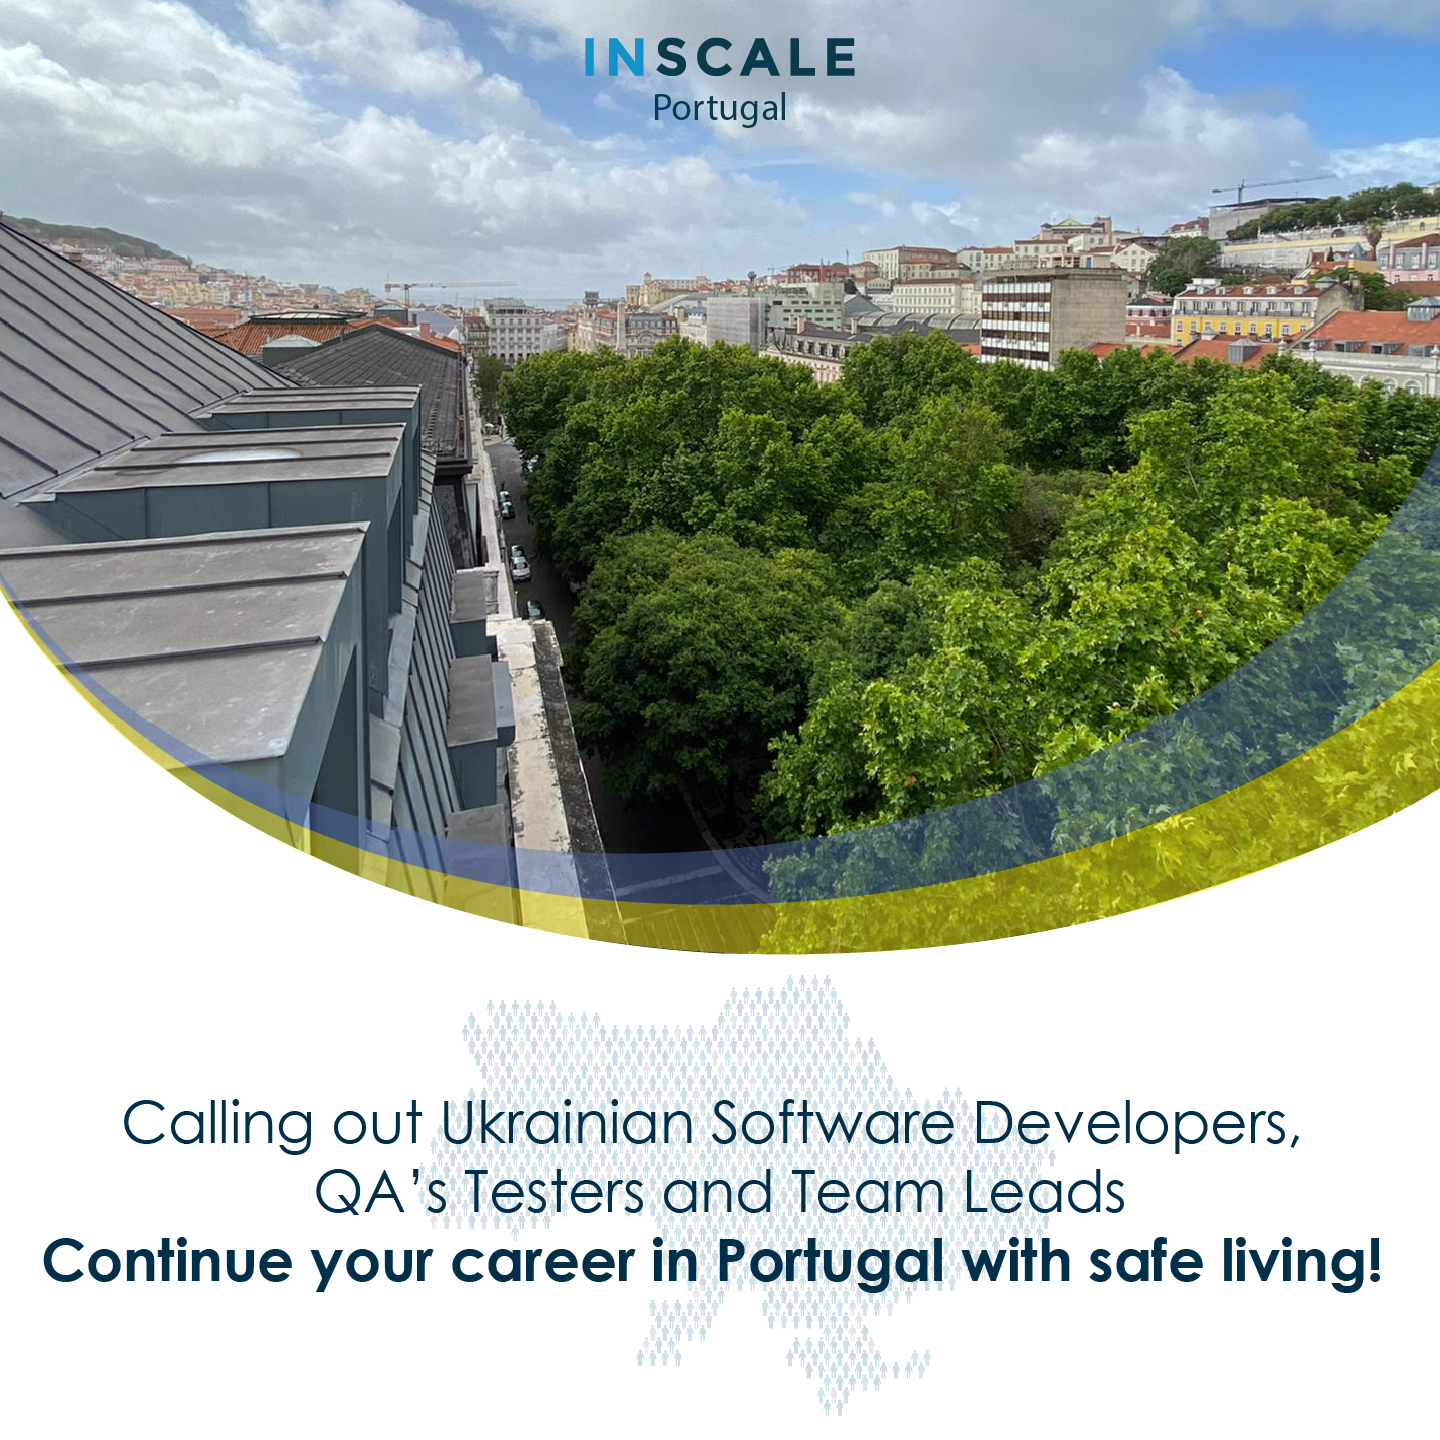 INSCALE wants to offer a helping hand, a beacon of hope for the Ukrainian refugees by helping with relocating and starting careers in Portugal.